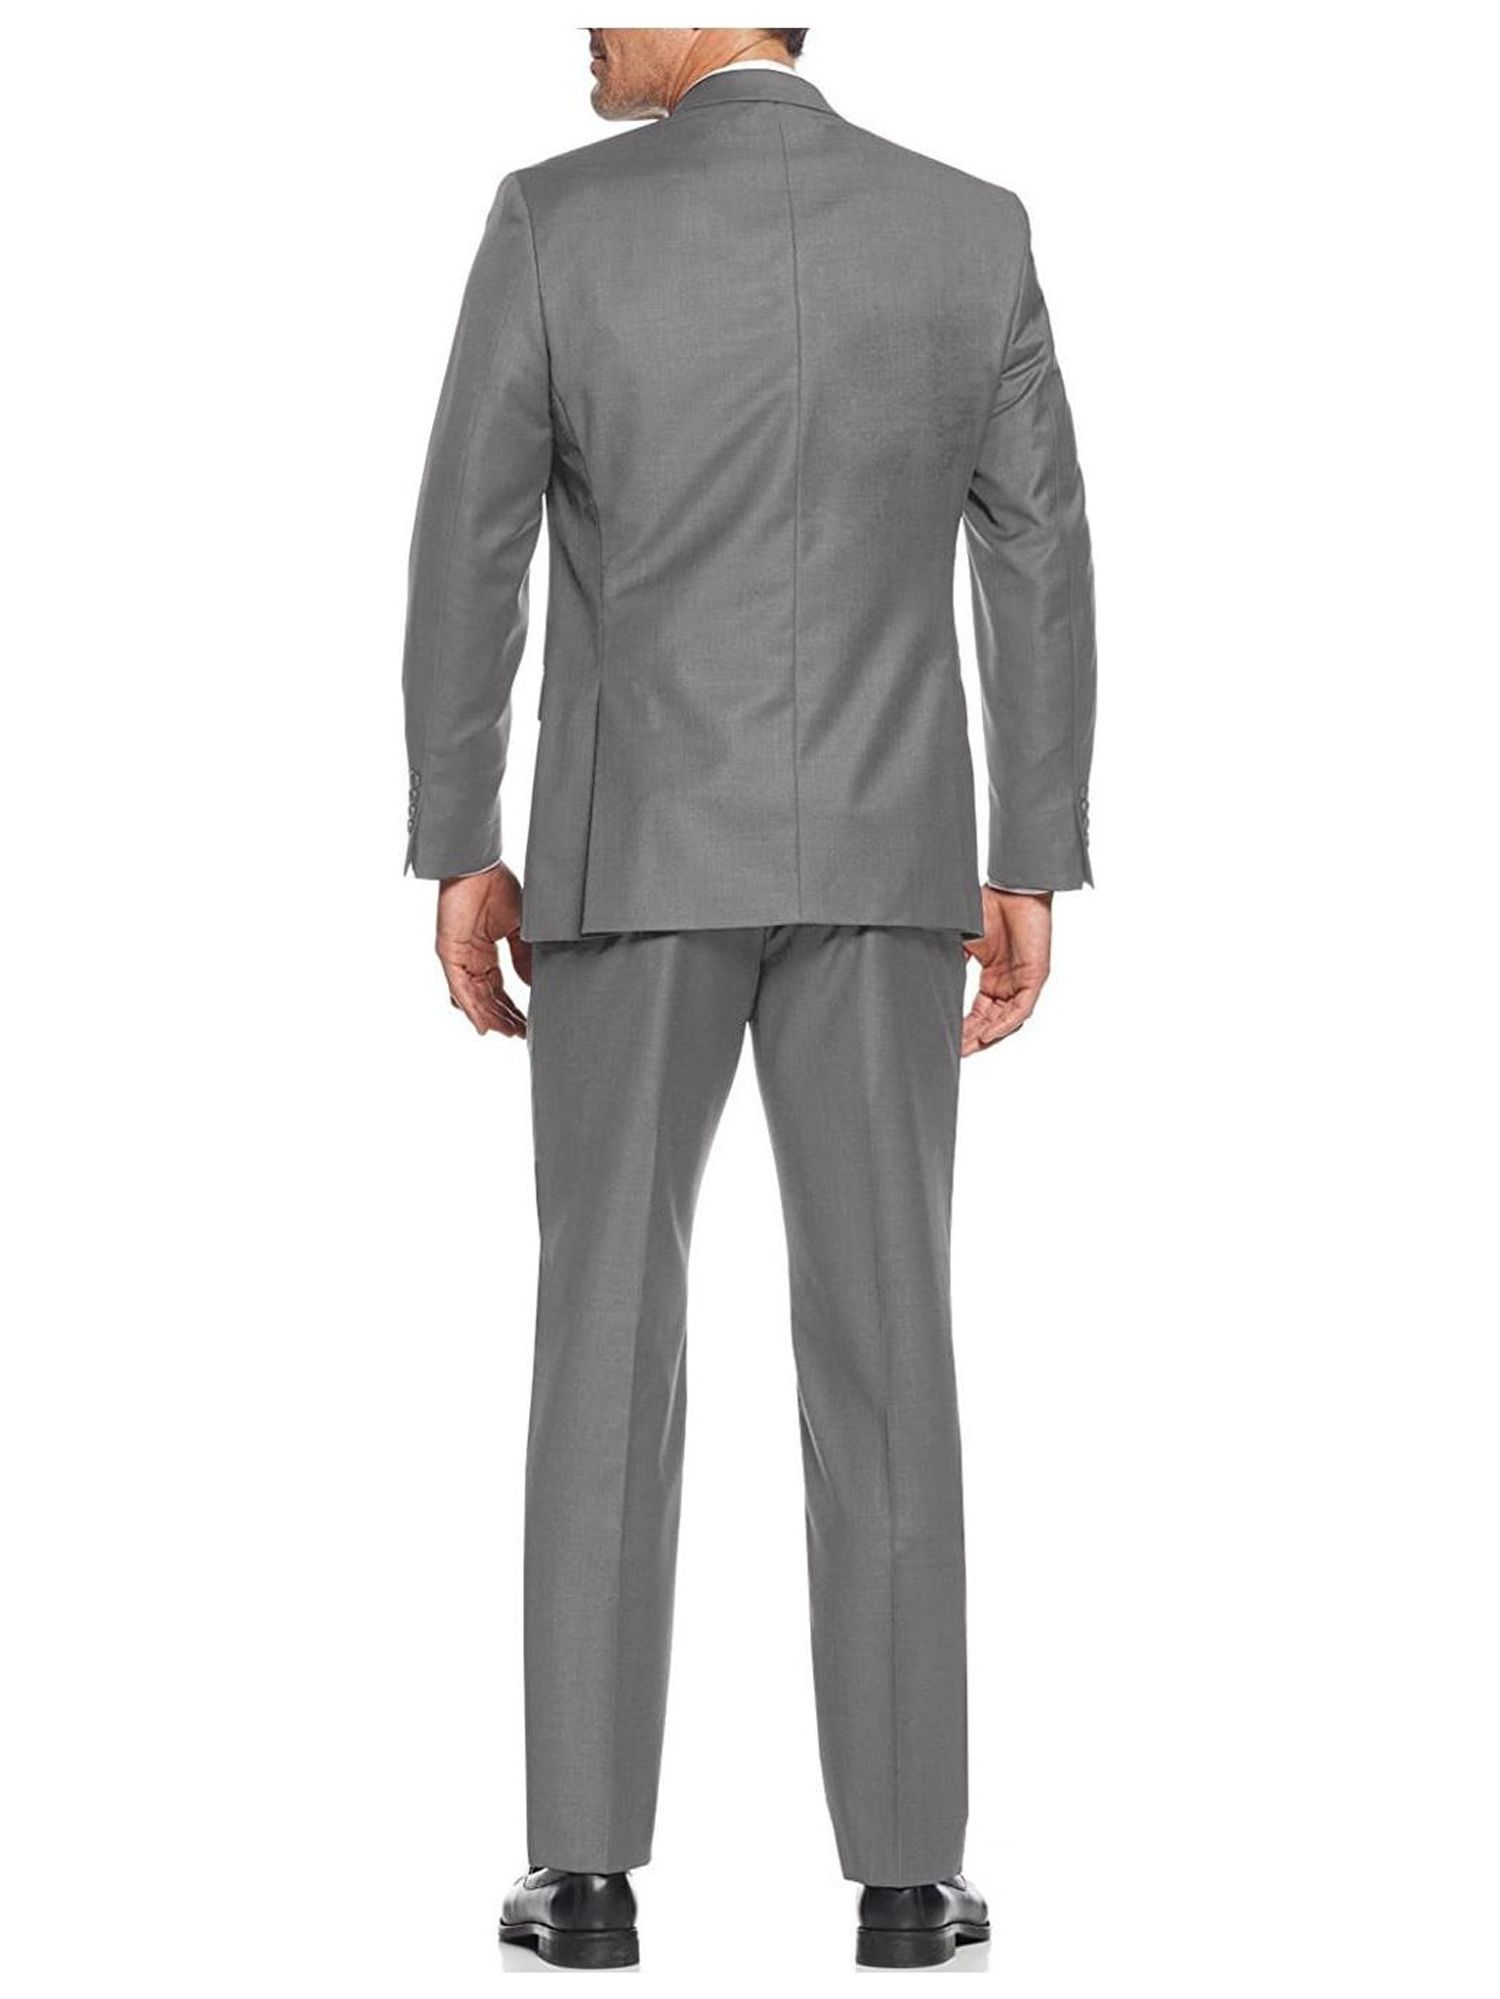 Mens Ticket Pocket Three Piece Gray Modern Fit Vested Suit - image 2 of 3